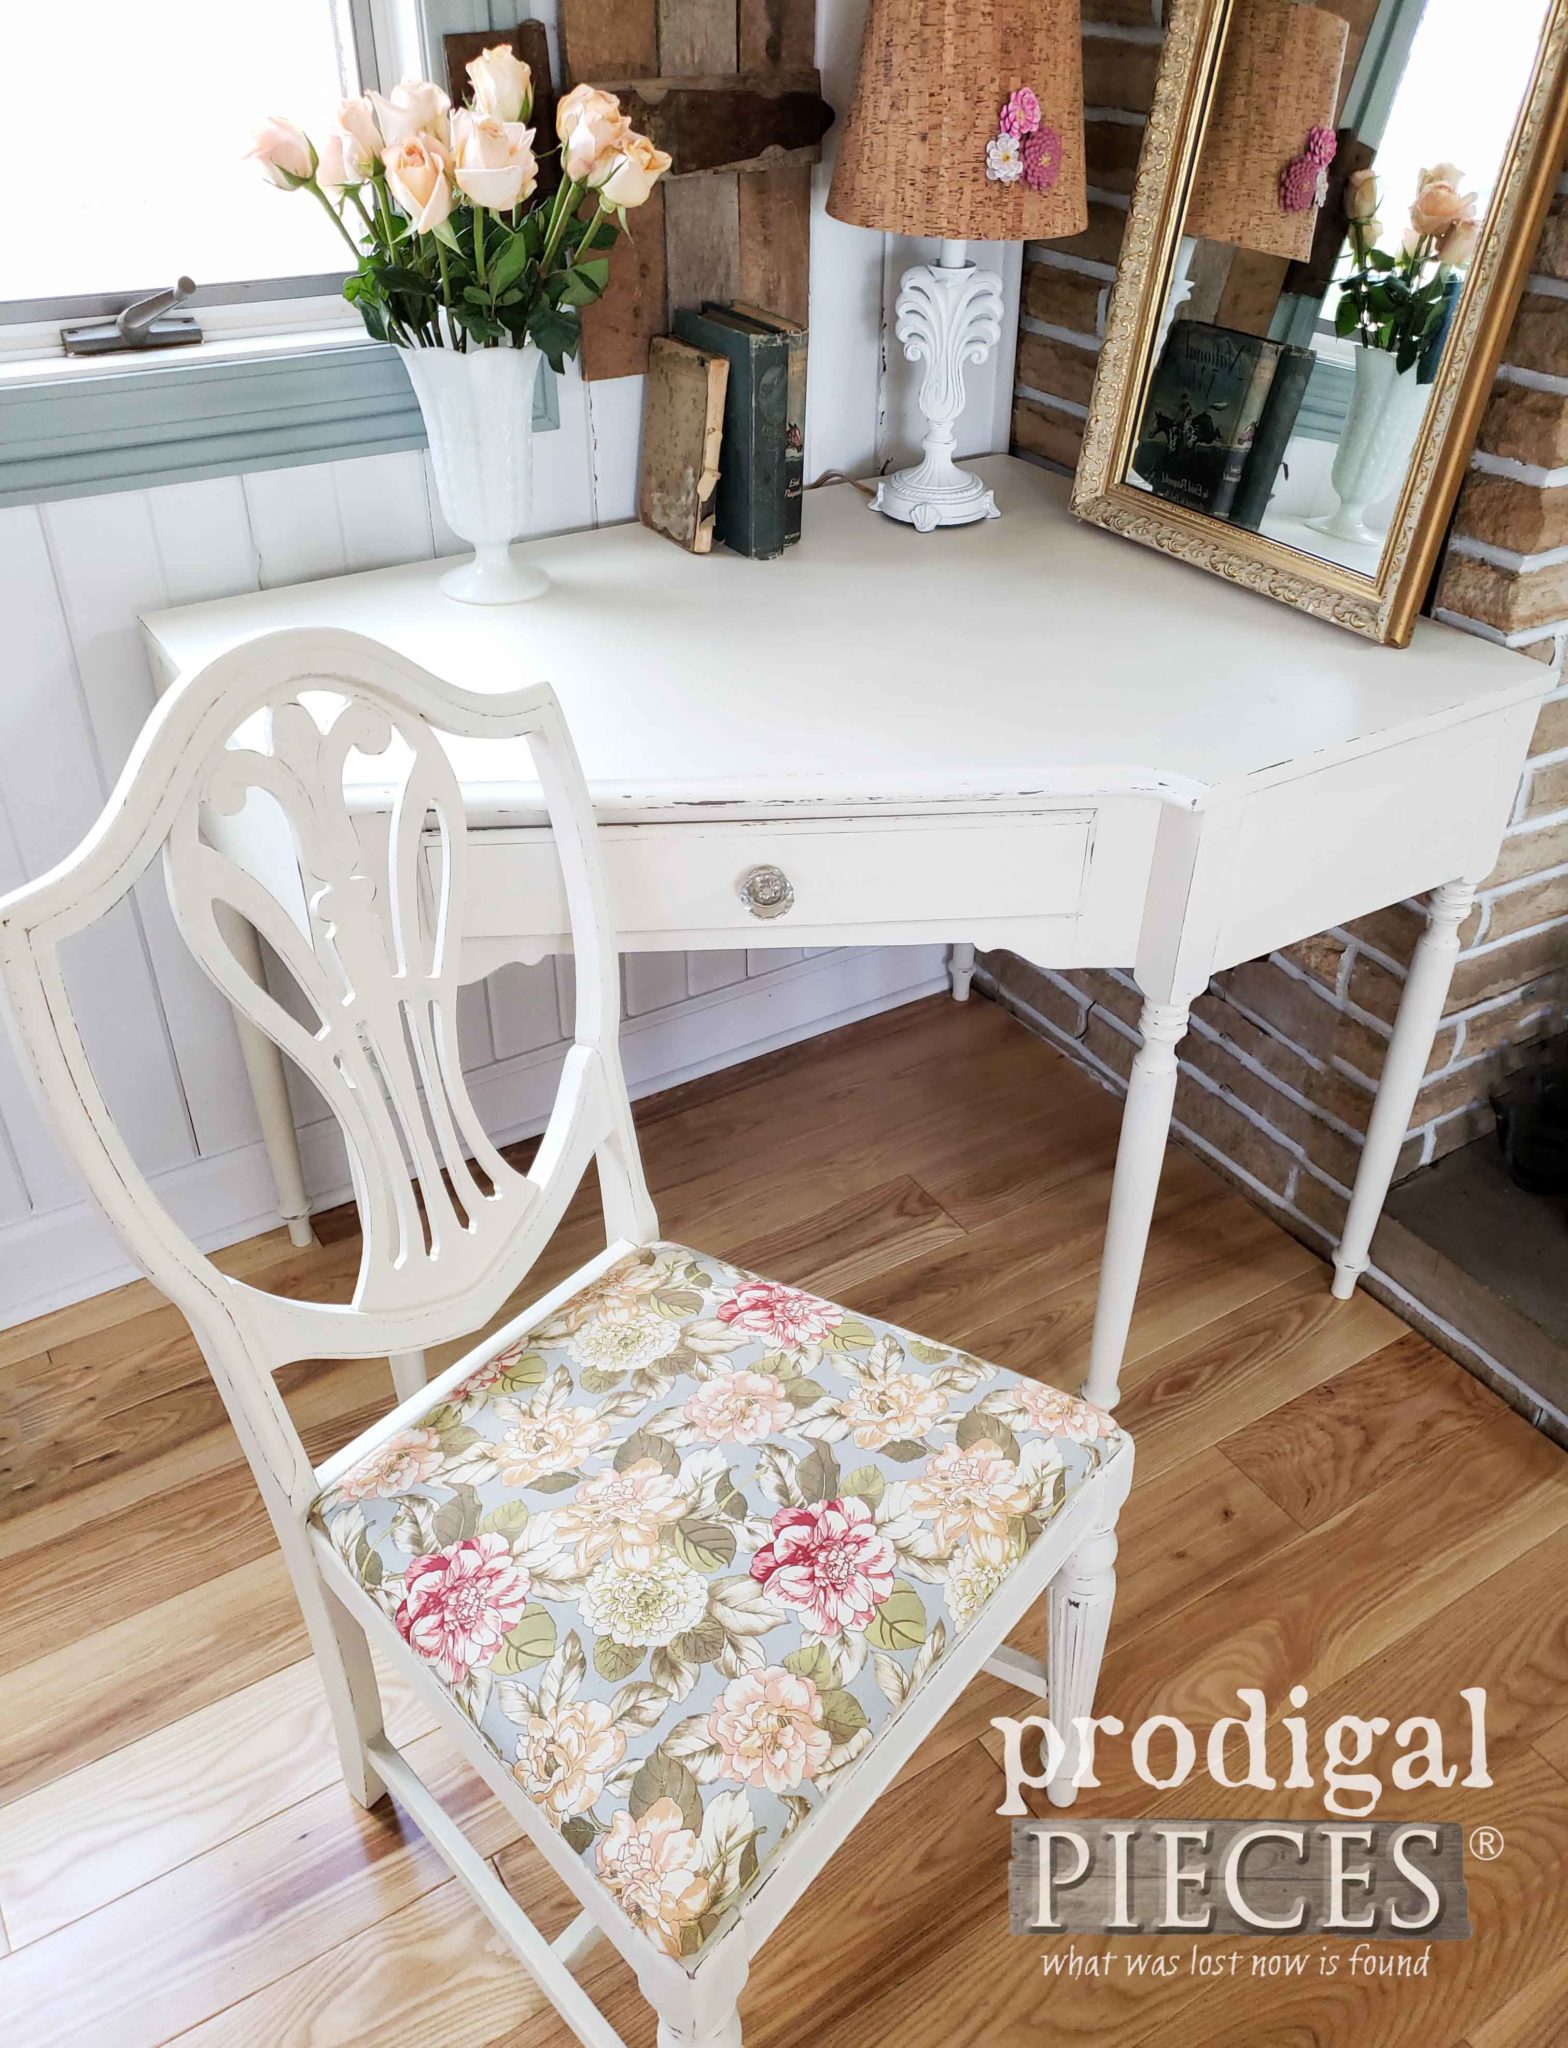 Upholstered Vintage Shield Back Chair with Corner Writing Desk by Larissa of Prodigal Pieces | prodigalpieces.com #prodigalpieces #furniture #shabbychic #home #homedecor #diy #vintage